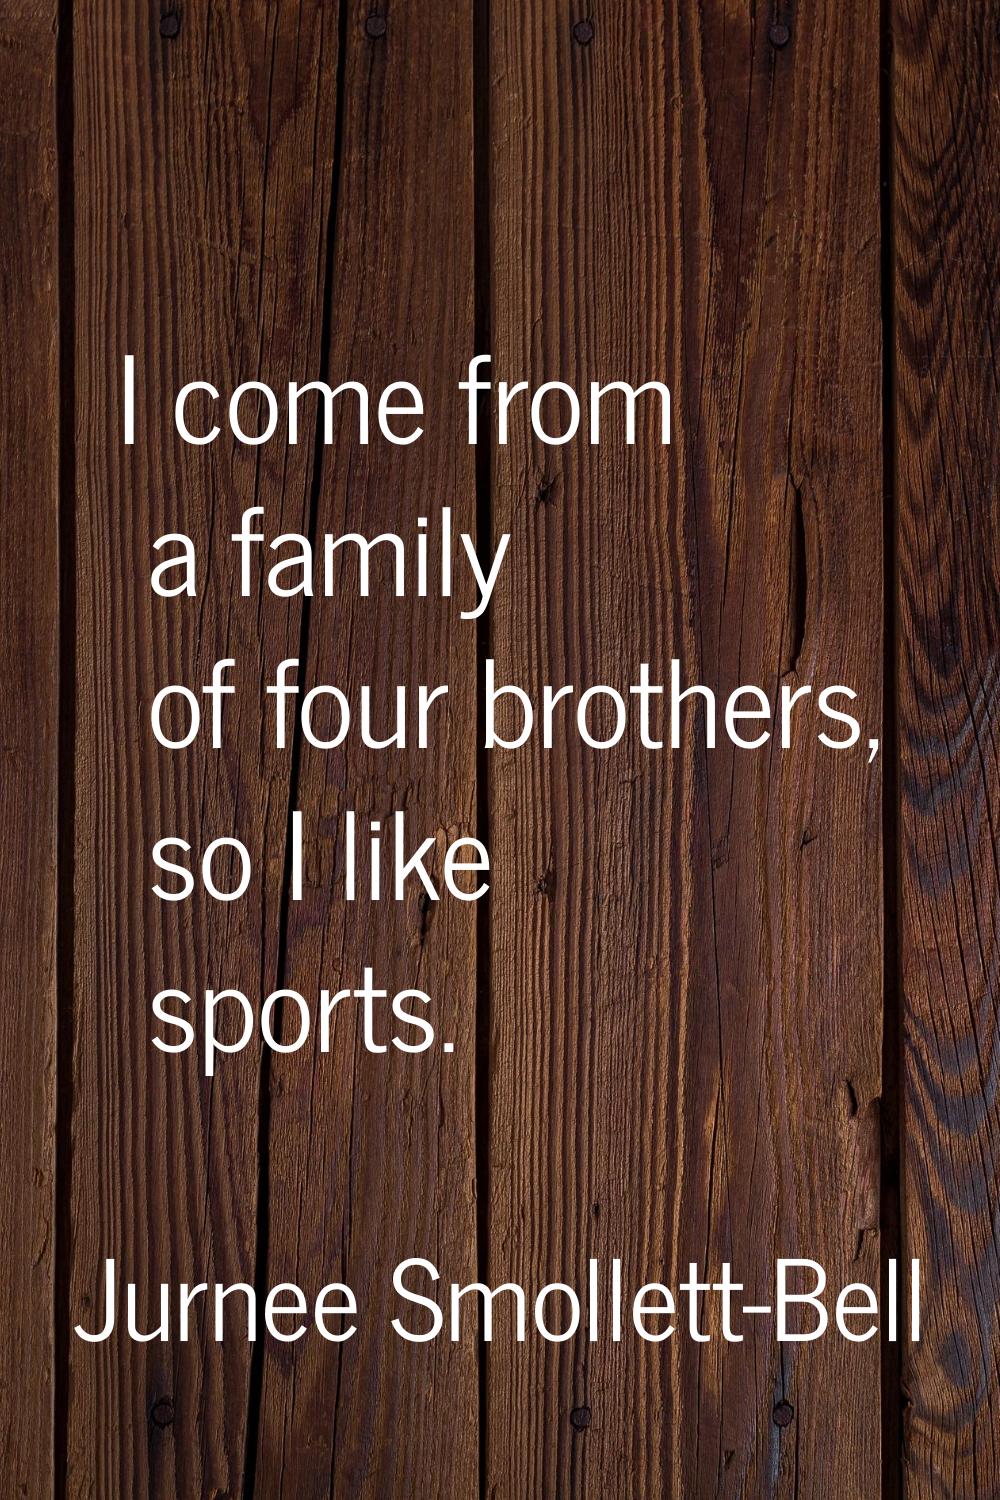 I come from a family of four brothers, so I like sports.